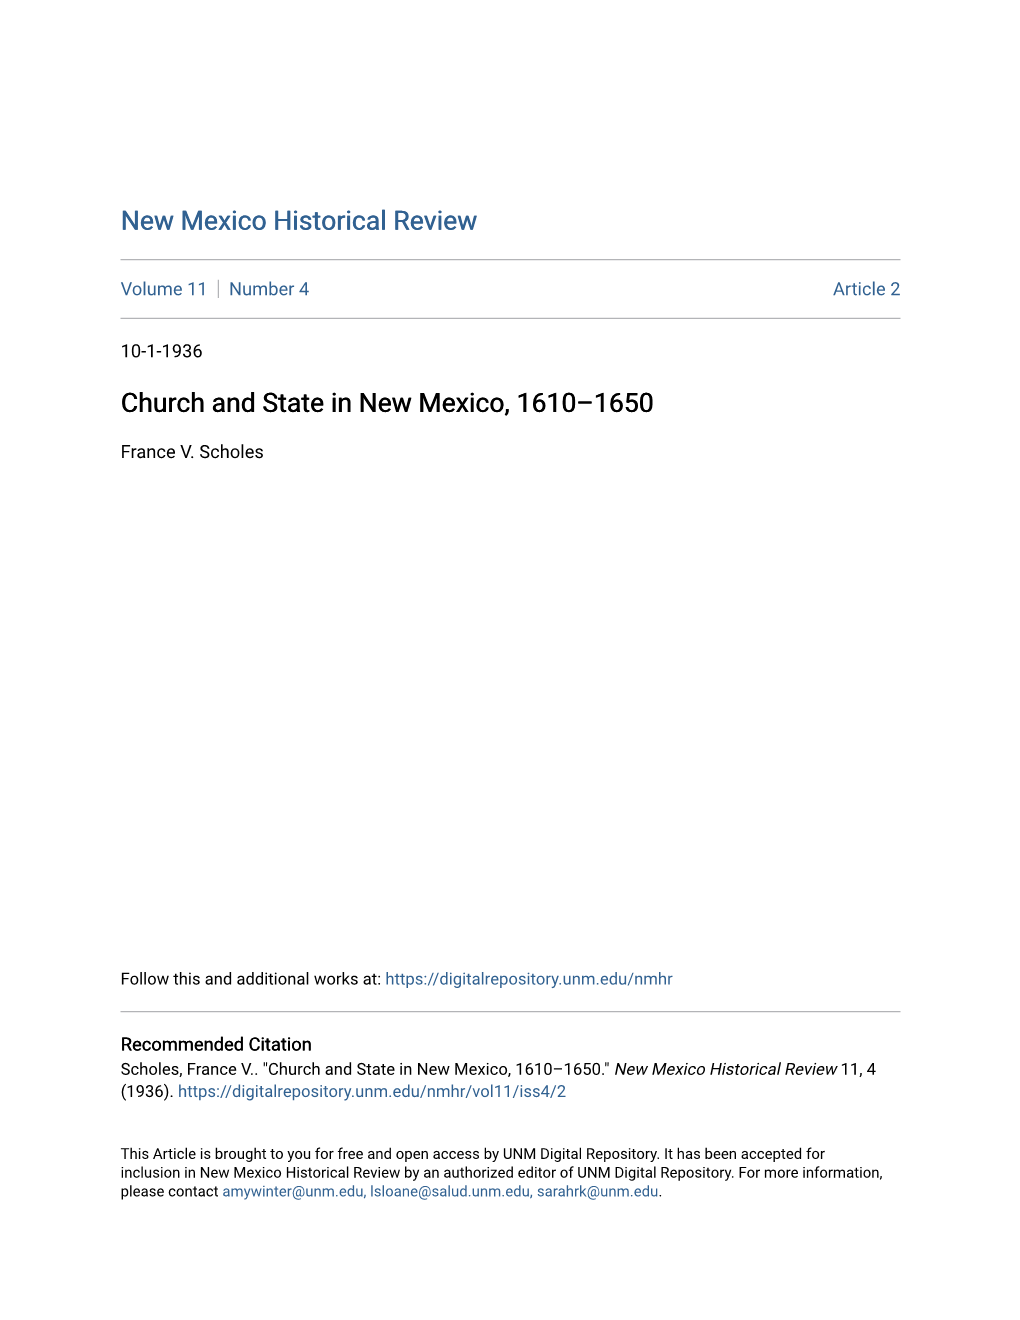 Church and State in New Mexico, 1610–1650